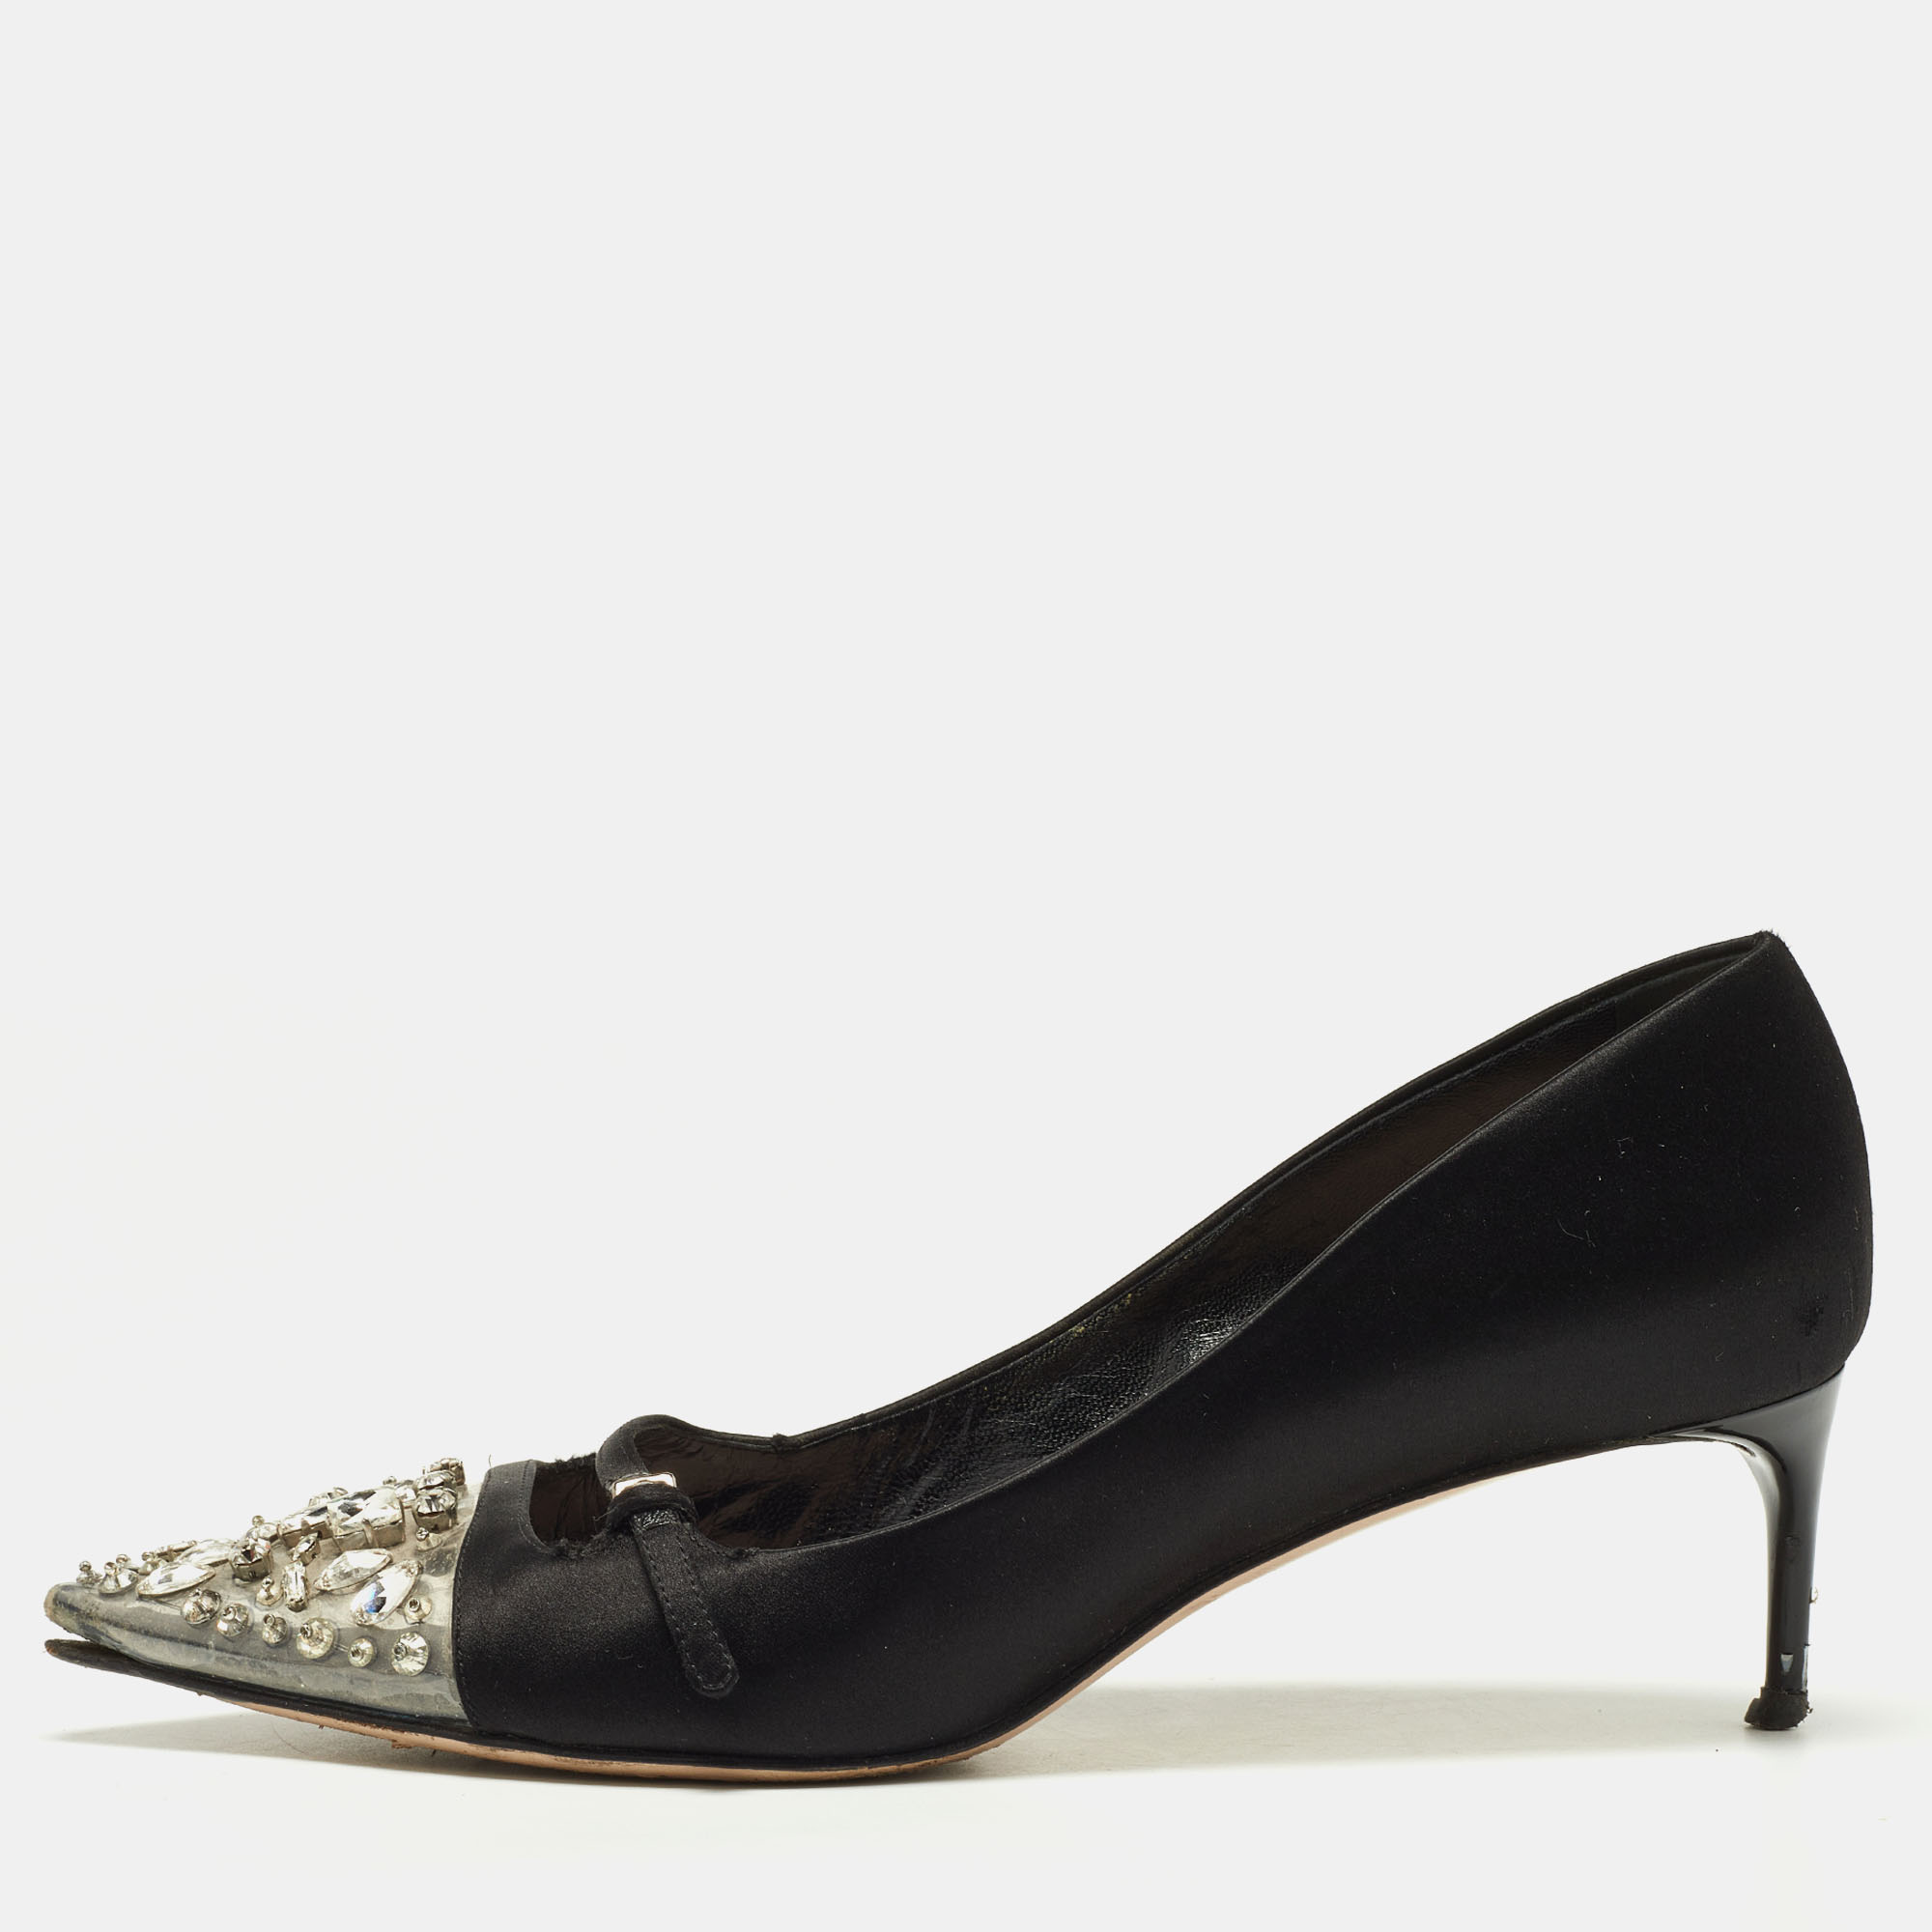 Pre-owned Miu Miu Black Satin And Crystal Embellished Pvc Pointed Toe Pumps Size 38